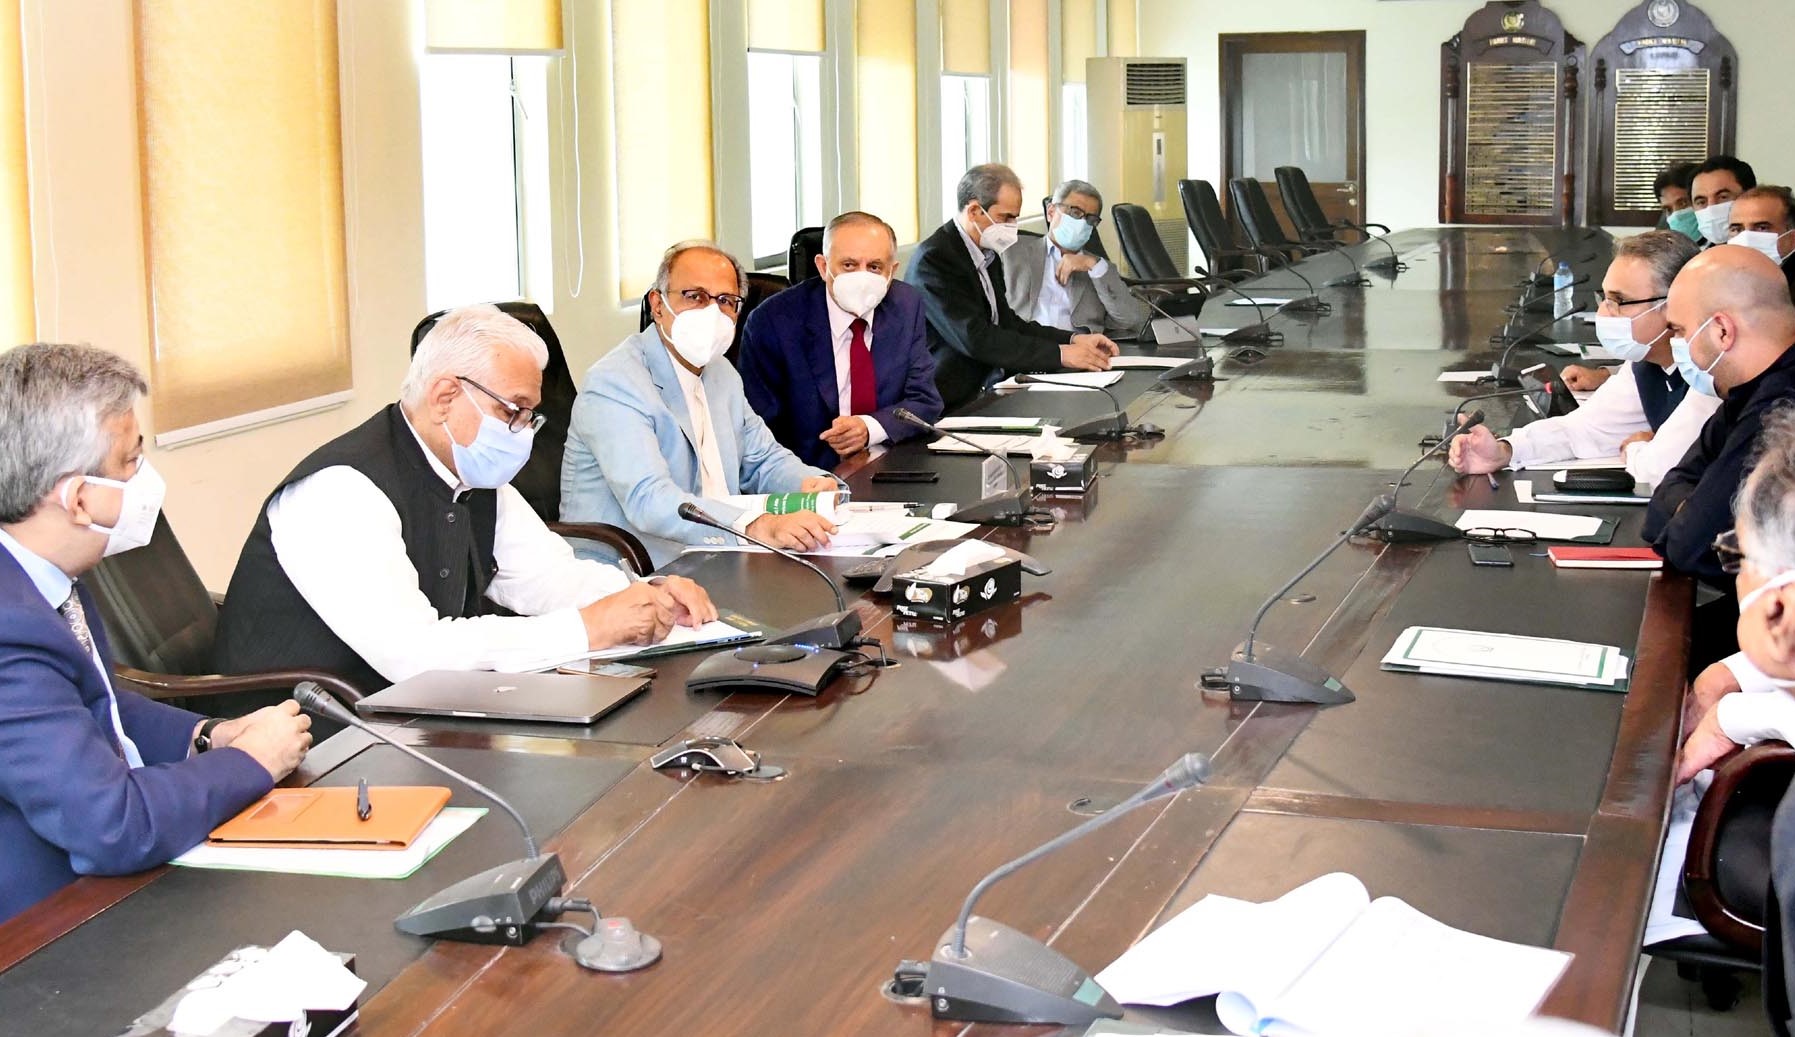 Adviser to the Prime Minister on Finance and Revenue, Dr. Abdul Hafeez Shaikh chairing a meeting to review the situation, availability and future demand of wheat and flour in the Khyber Pakhtunkhwa province in Islamabad on August 17, 2020.